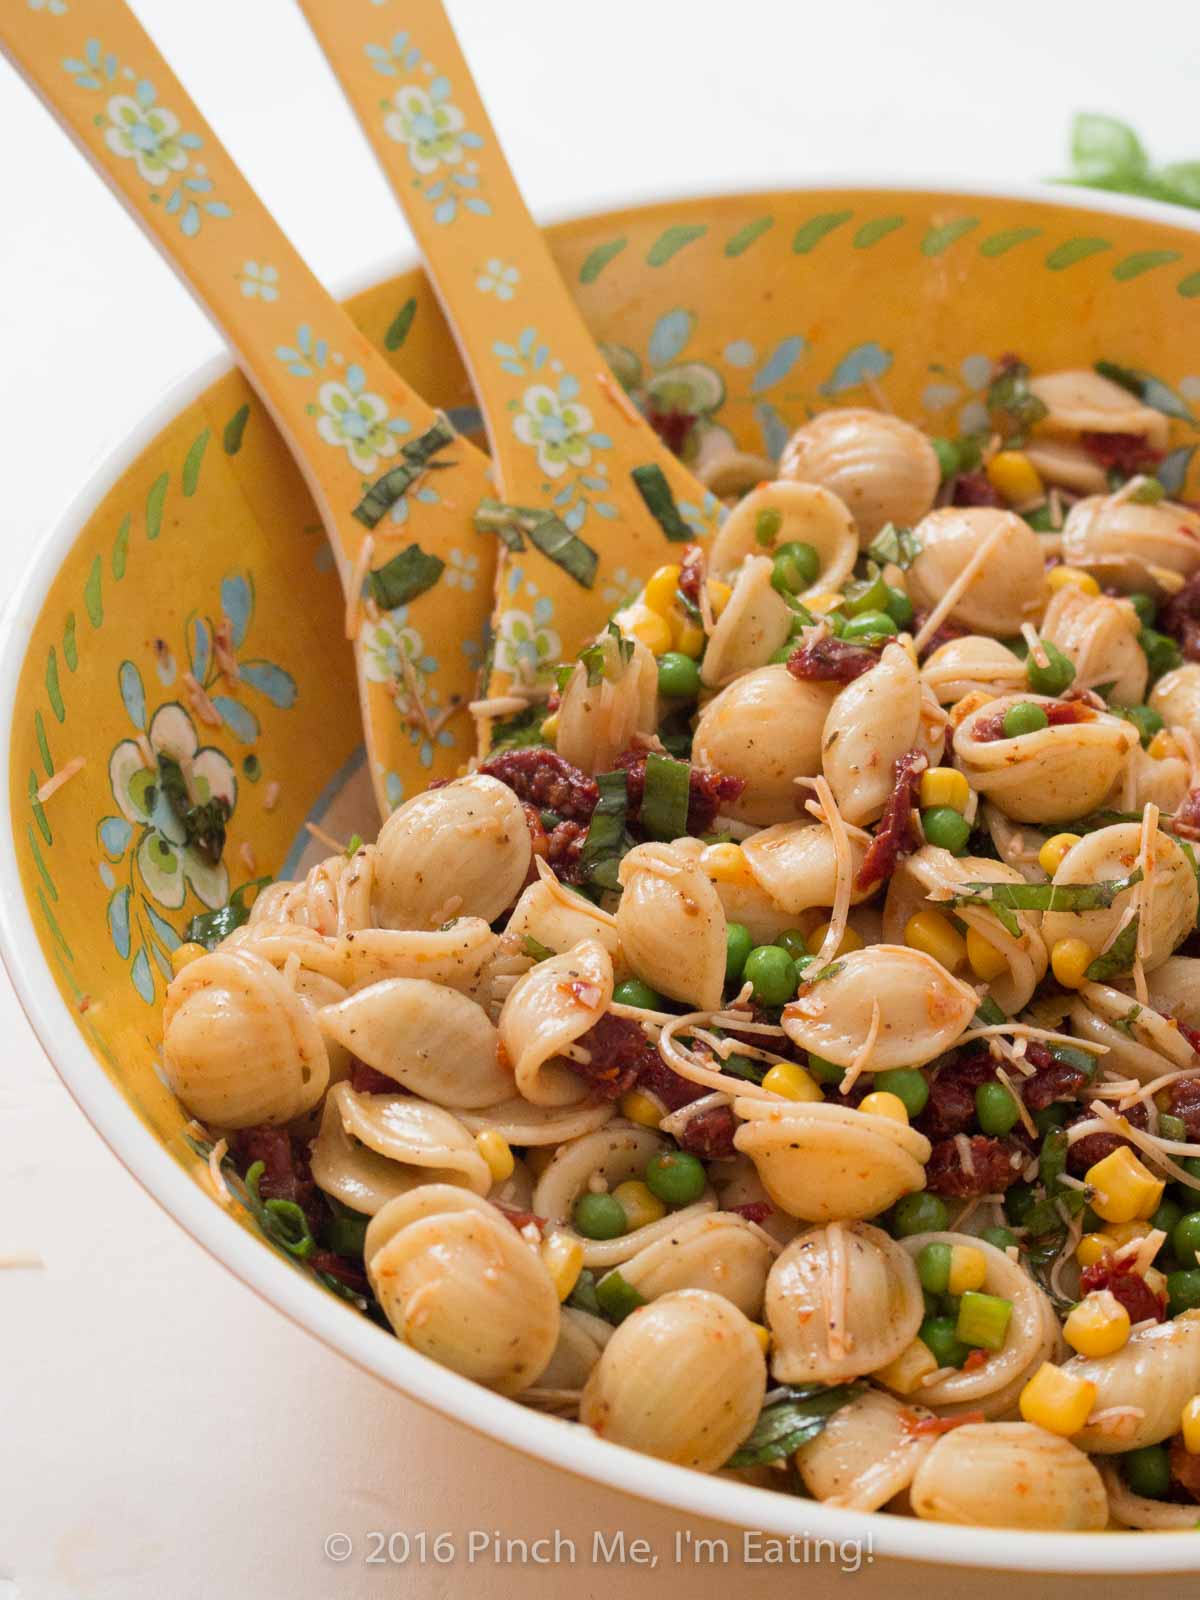 Sun-dried tomato orecchiette pasta salad with basil, corn, peas, and parmesan in a yellow flowered bowl.